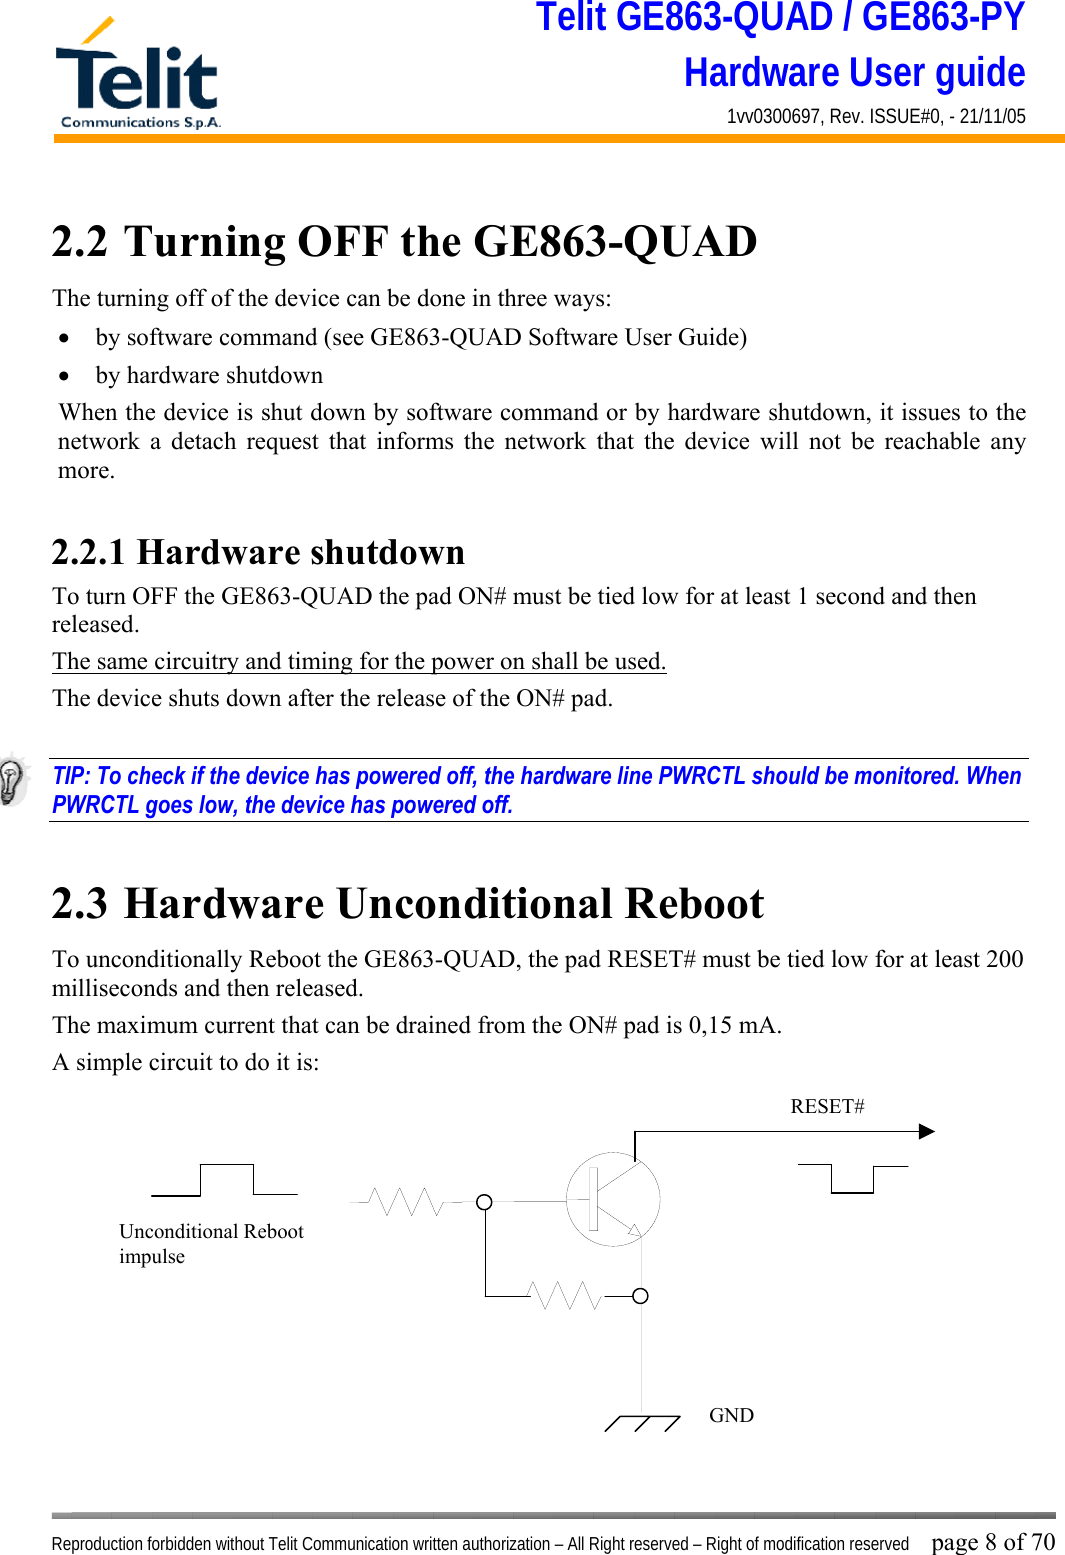 Telit GE863-QUAD / GE863-PY Hardware User guide 1vv0300697, Rev. ISSUE#0, - 21/11/05    Reproduction forbidden without Telit Communication written authorization – All Right reserved – Right of modification reserved page 8 of 70 2.2  Turning OFF the GE863-QUAD The turning off of the device can be done in three ways: •  by software command (see GE863-QUAD Software User Guide) •  by hardware shutdown When the device is shut down by software command or by hardware shutdown, it issues to the network a detach request that informs the network that the device will not be reachable any more.   2.2.1 Hardware shutdown To turn OFF the GE863-QUAD the pad ON# must be tied low for at least 1 second and then released. The same circuitry and timing for the power on shall be used. The device shuts down after the release of the ON# pad.  TIP: To check if the device has powered off, the hardware line PWRCTL should be monitored. When PWRCTL goes low, the device has powered off.  2.3  Hardware Unconditional Reboot To unconditionally Reboot the GE863-QUAD, the pad RESET# must be tied low for at least 200 milliseconds and then released. The maximum current that can be drained from the ON# pad is 0,15 mA. A simple circuit to do it is:              RESET# Unconditional Reboot impulse   GND